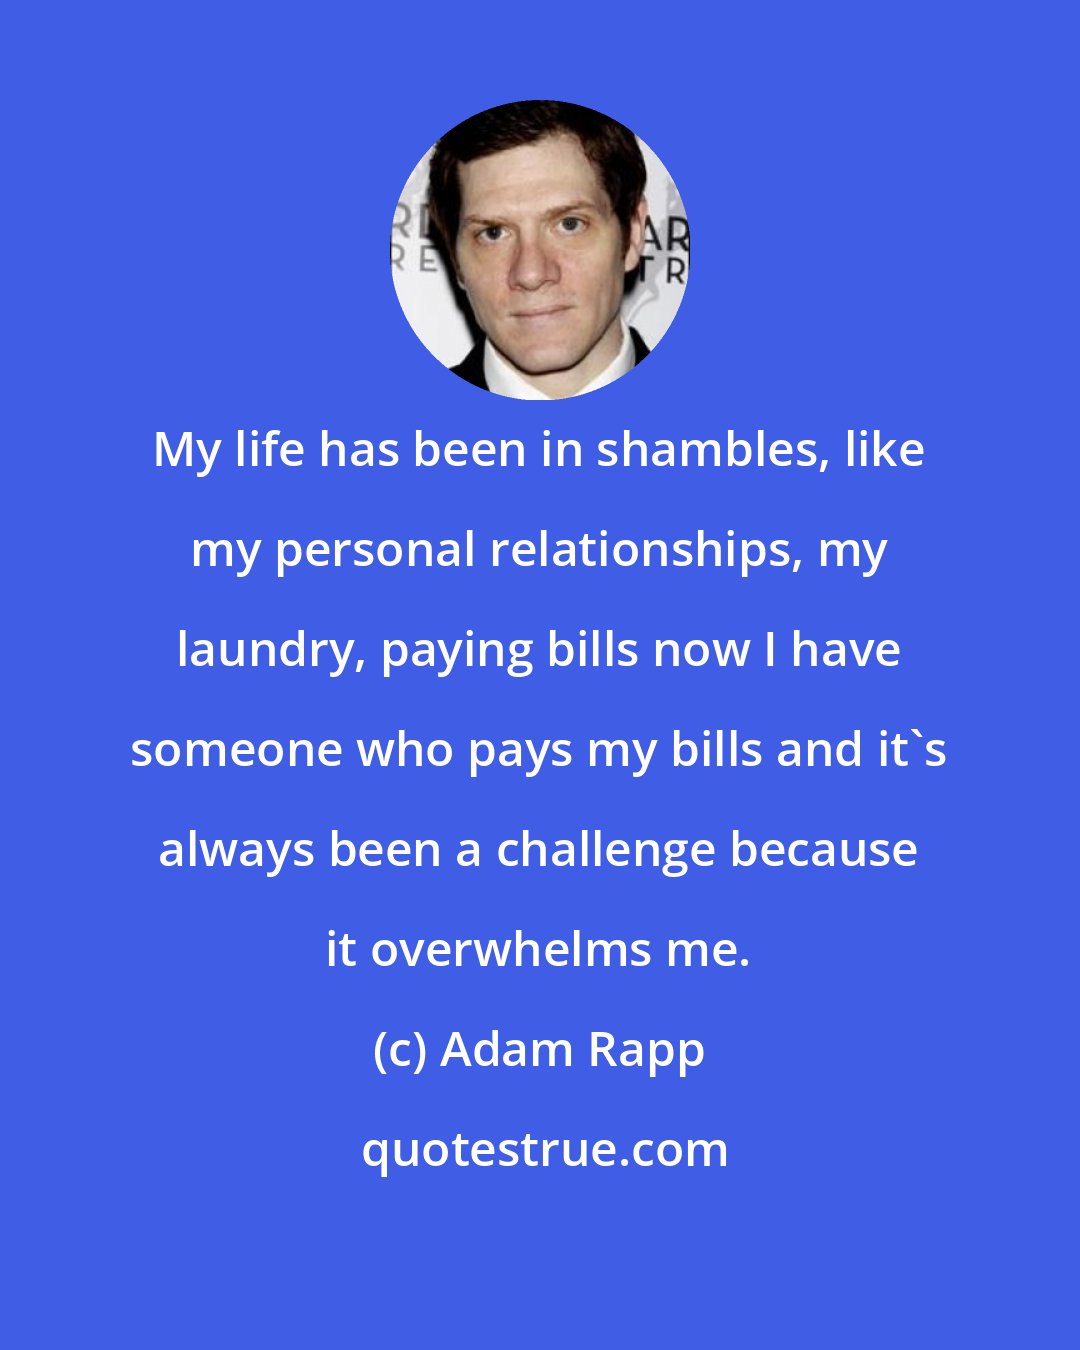 Adam Rapp: My life has been in shambles, like my personal relationships, my laundry, paying bills now I have someone who pays my bills and it's always been a challenge because it overwhelms me.